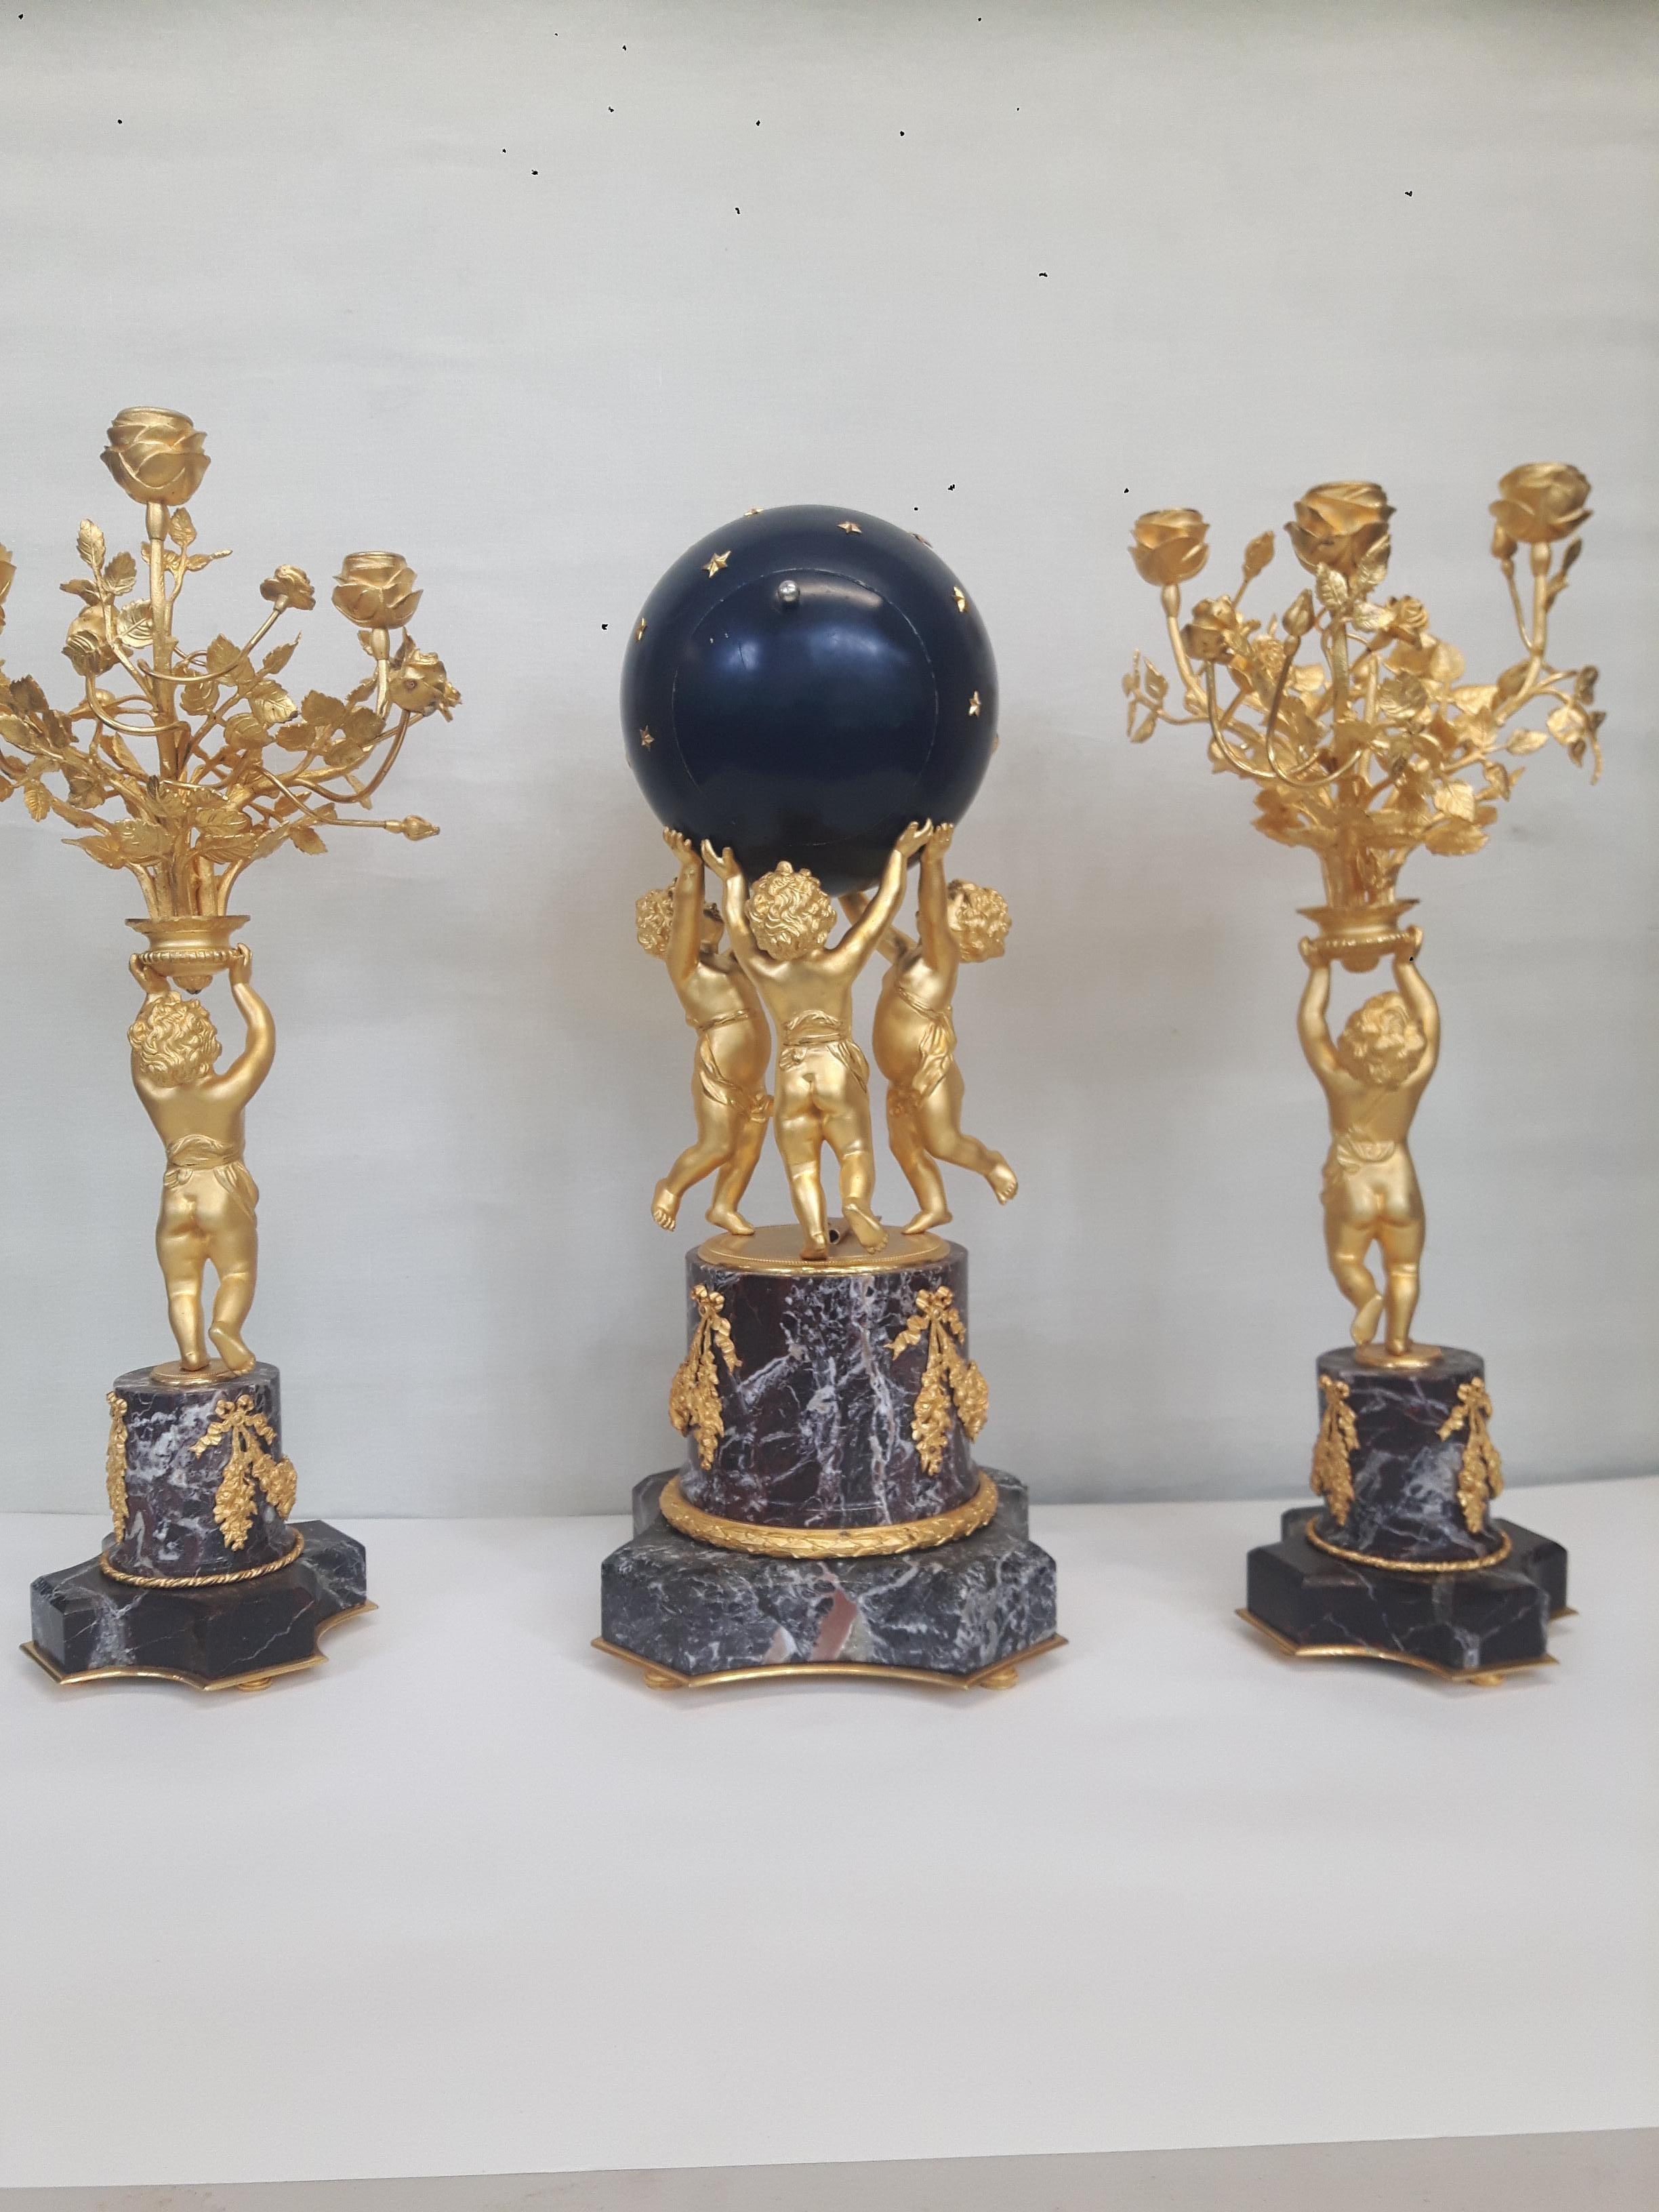 Three piece clock garniture, comprising of a pair of 3 lights ormolou candelabras. Held by cherubs on marble columns, with octagonal bases. The marble applied with finely cast swags. Also roie de blue enamel globe clock, supported by 3 cherubs